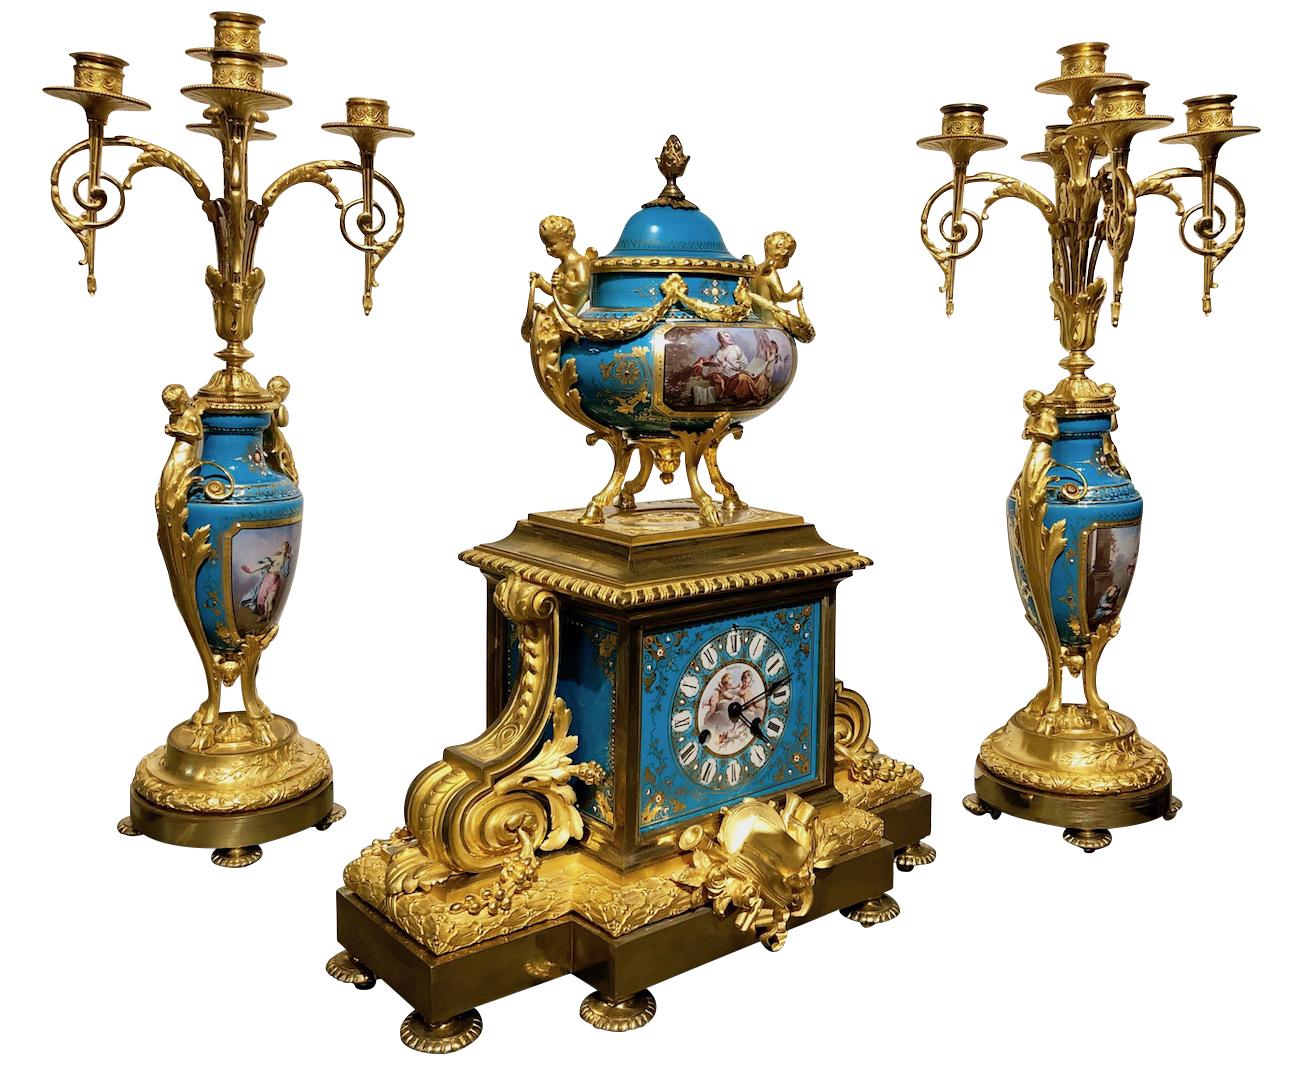 Napoleon III 19th Century Ormolu Bronze and Sevres Jeweled Clock Set by H. Picard/Deniere